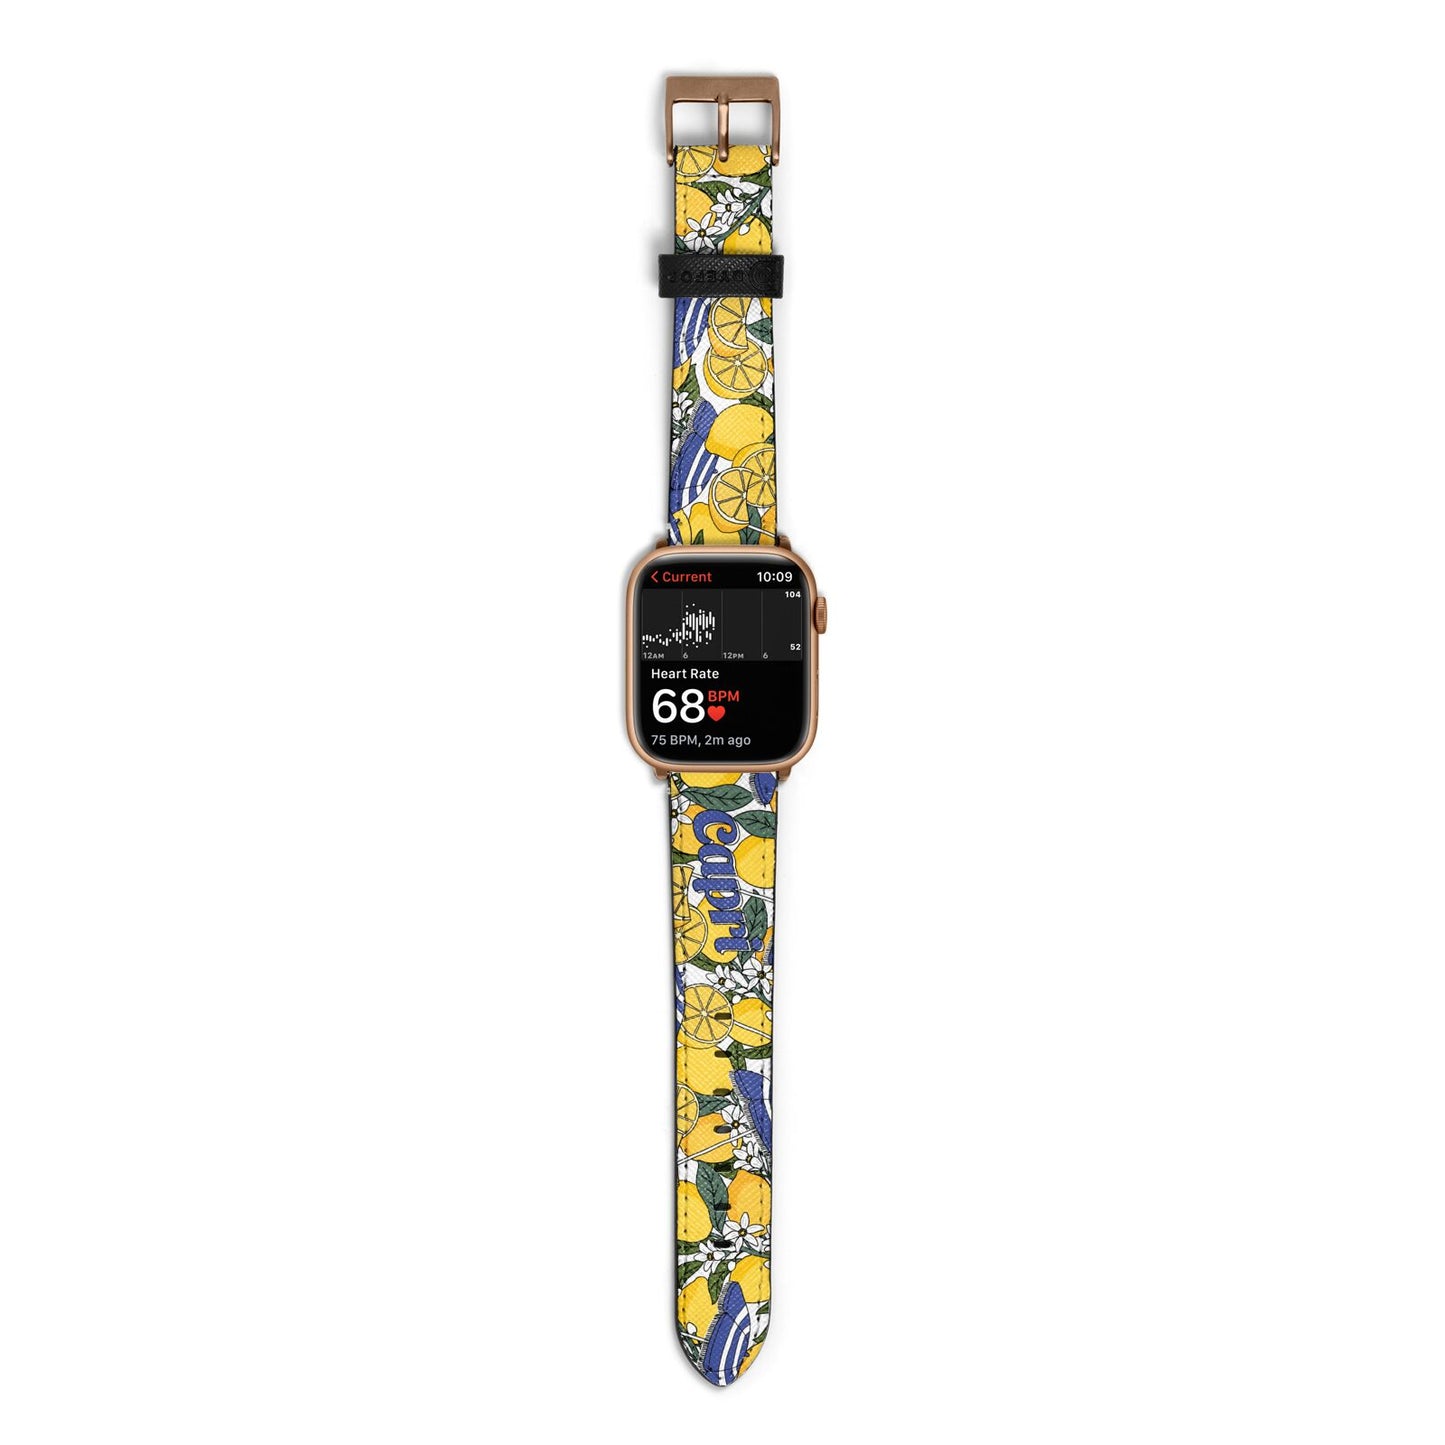 Capri Apple Watch Strap Size 38mm with Gold Hardware